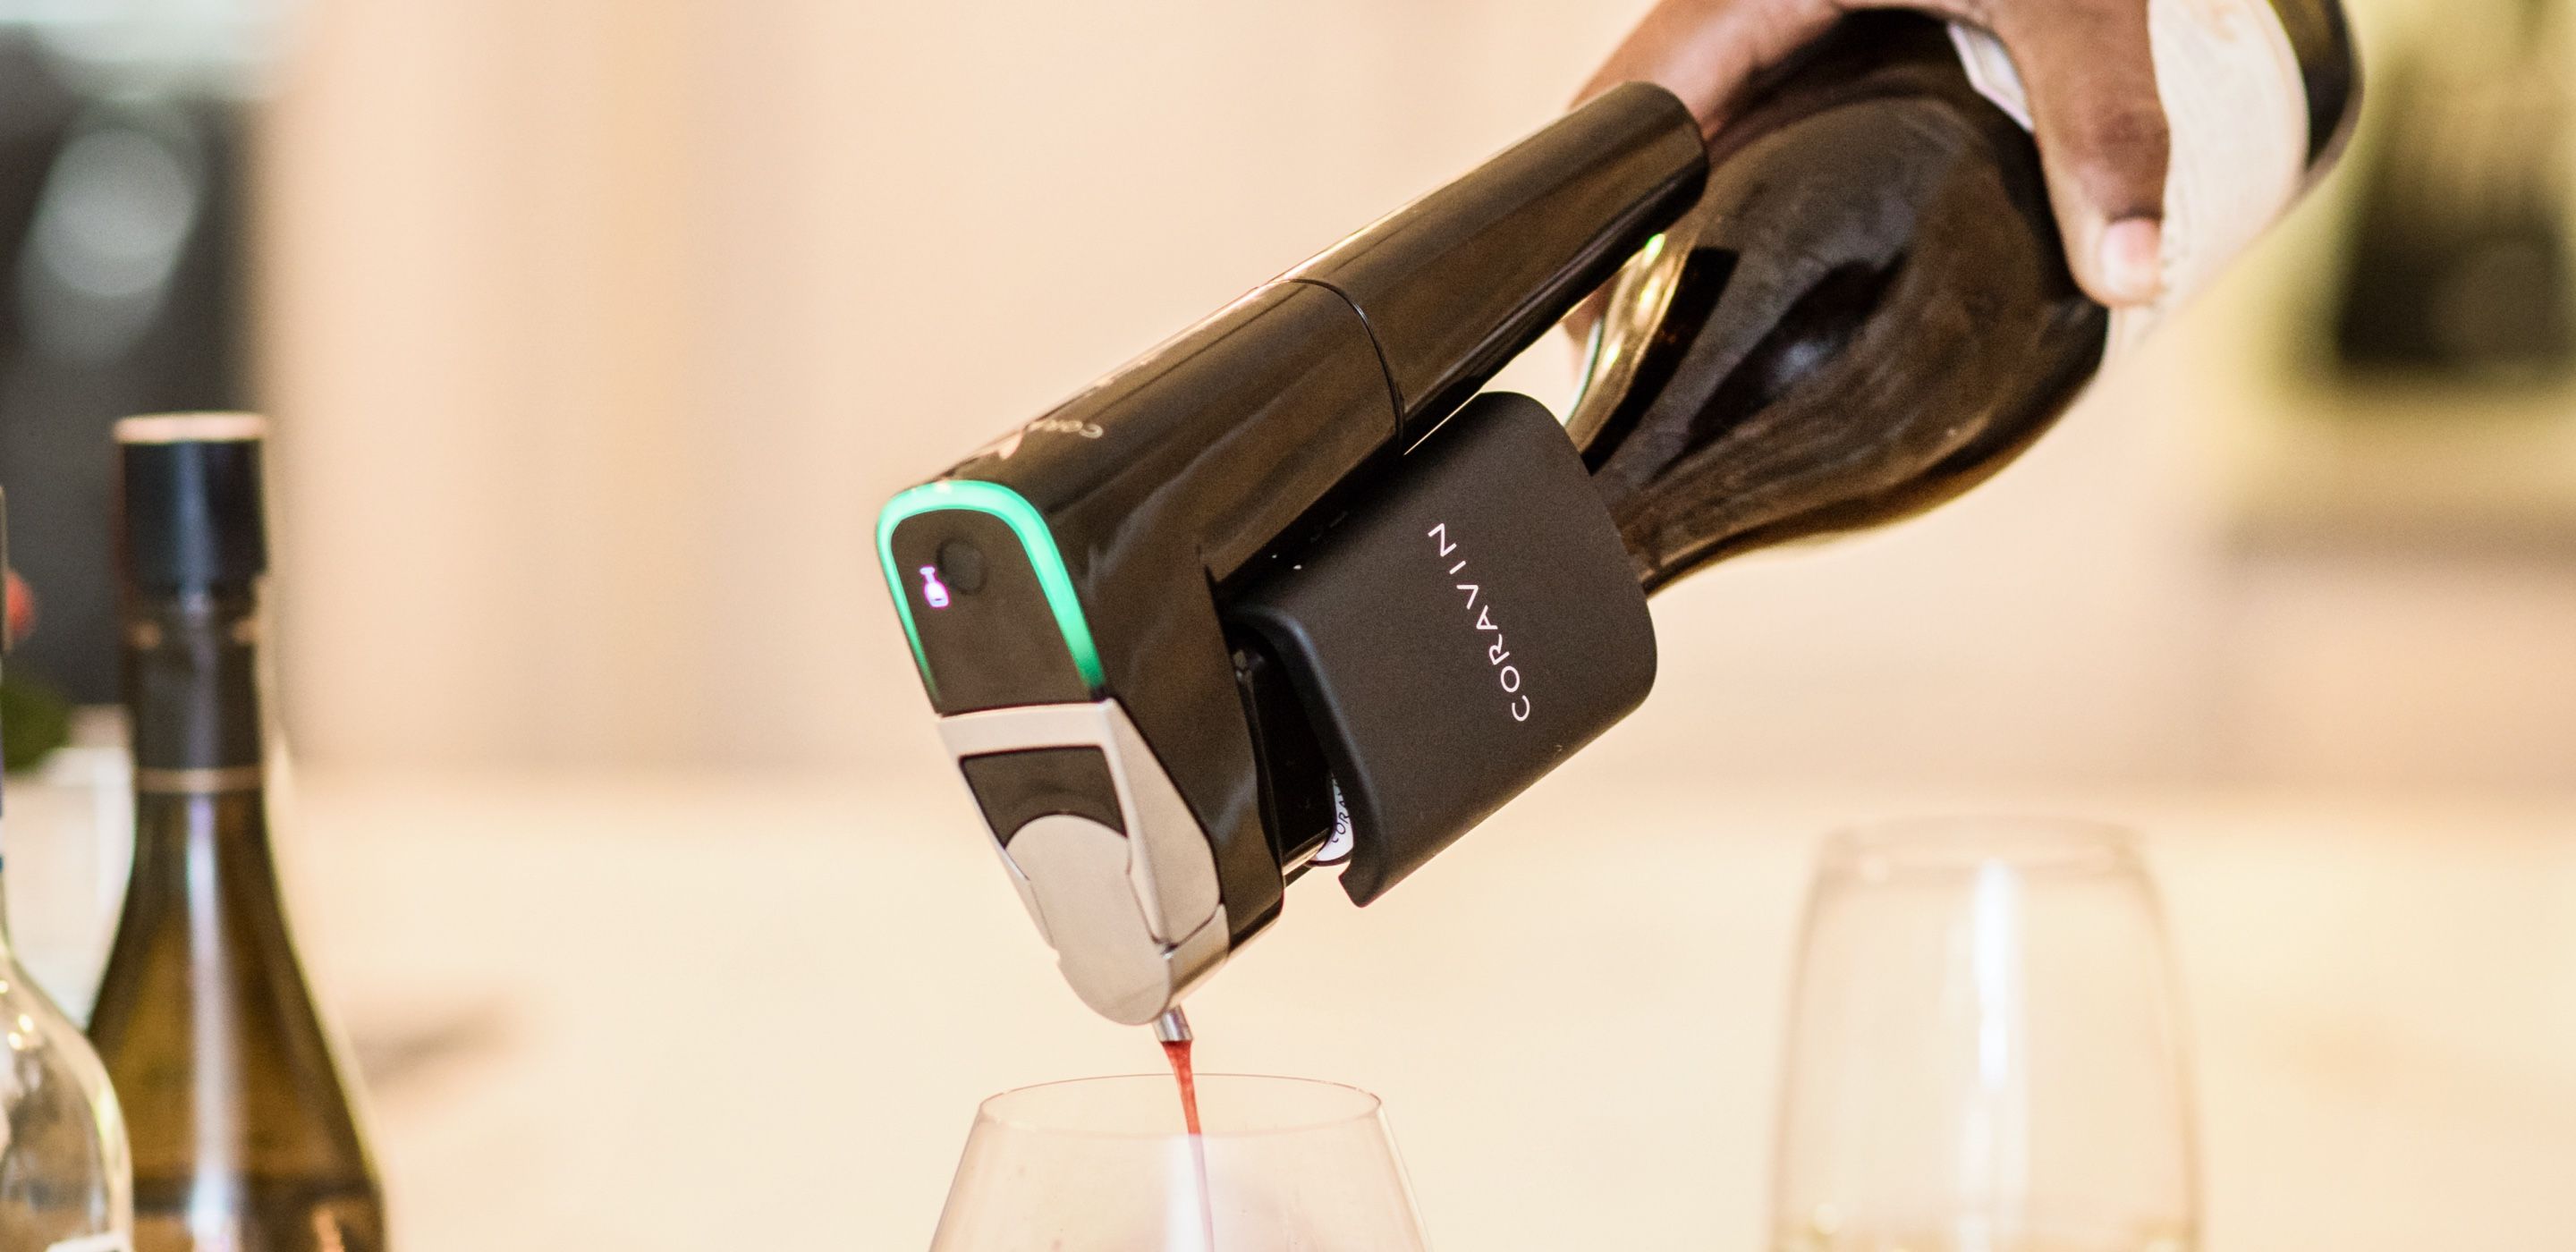 Coravin's wine preservation system on top of a bottle, as a person is pouring wine into a wine glass.